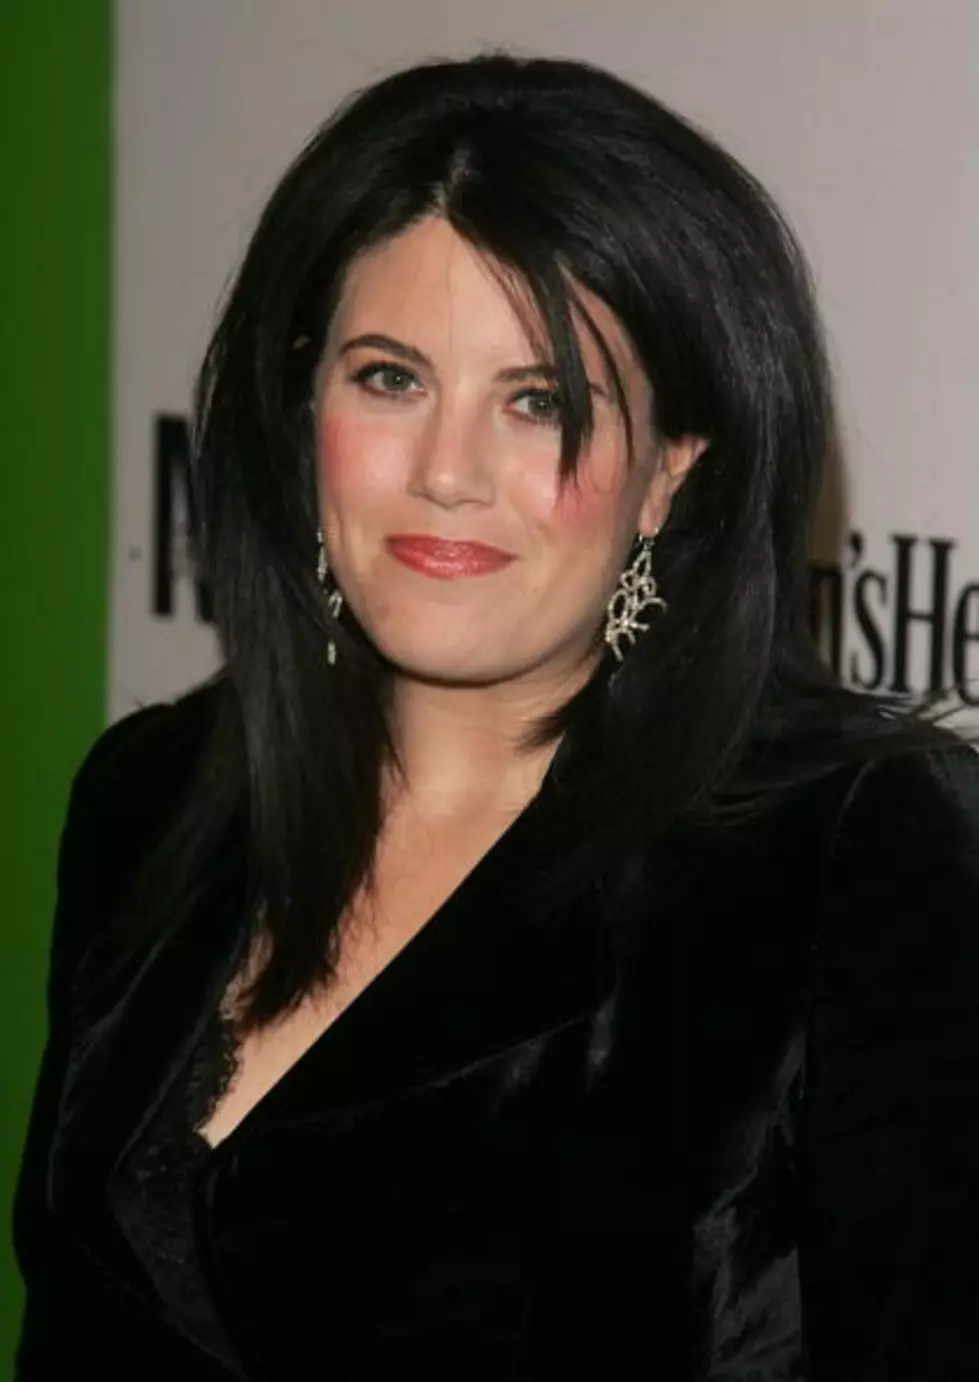 Monica Lewinsky Finally Spills Her Guts On What Really Happened with Bill Clinton